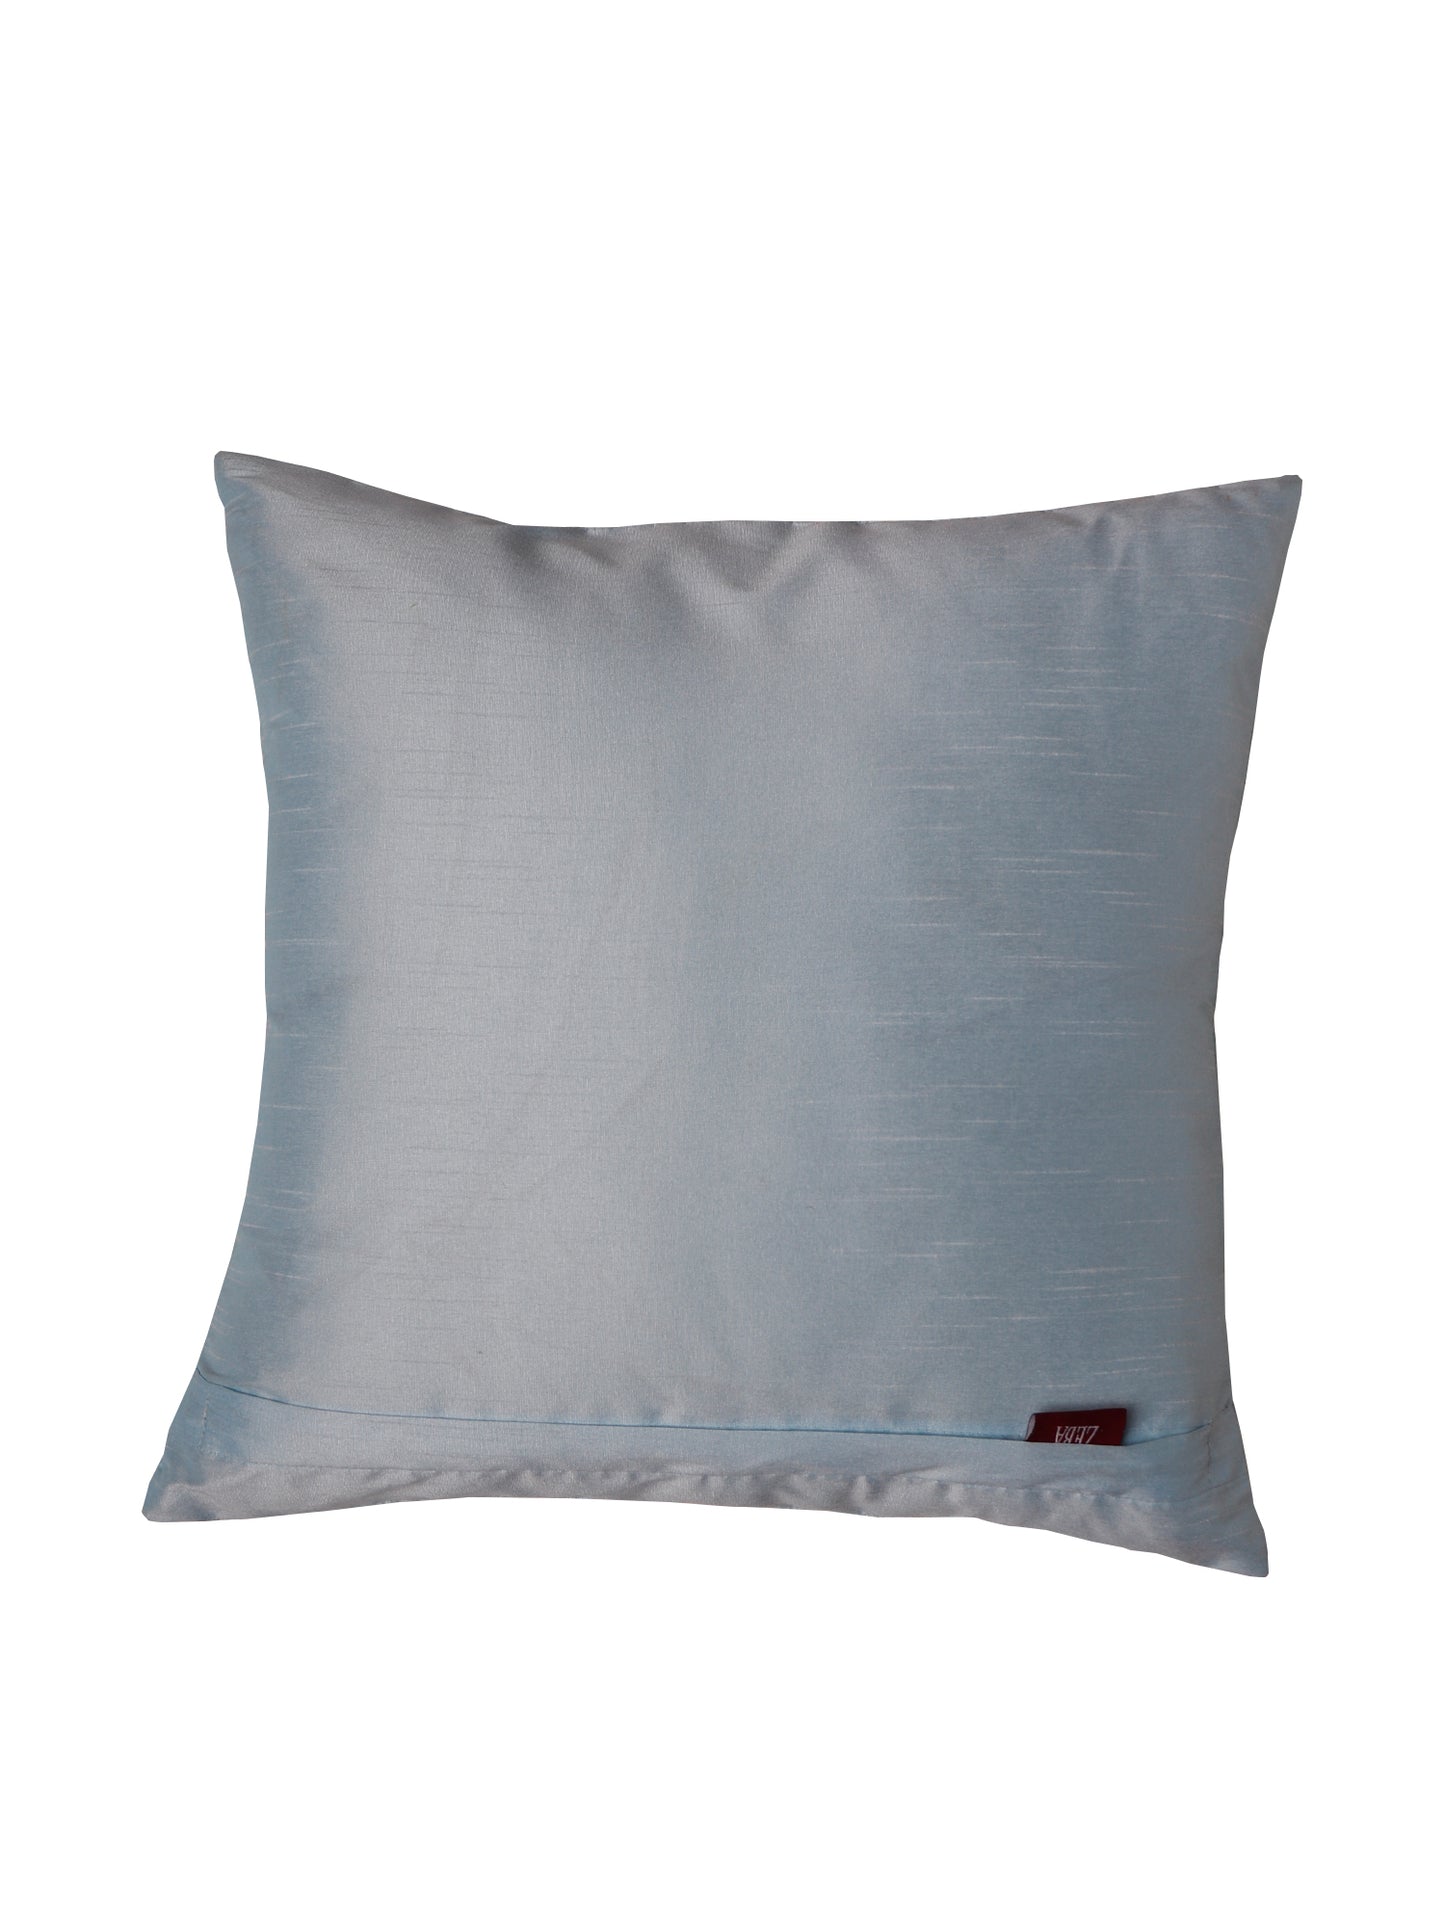 Cushion Cover Polyester Zari Embroidery with Self Quilting Sky Blue - 16"x16"